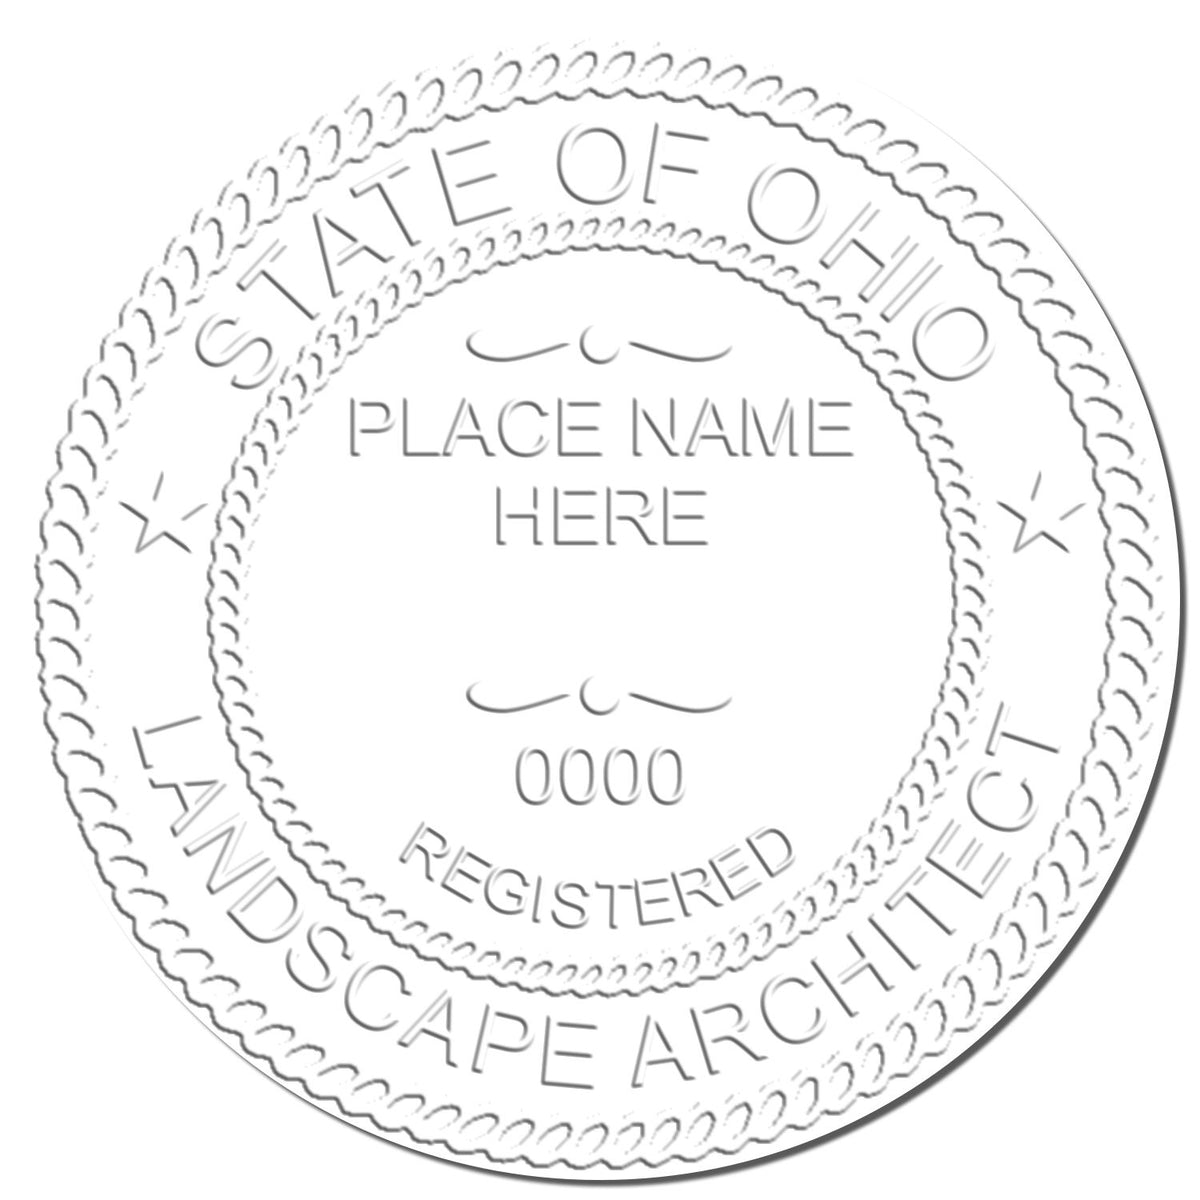 This paper is stamped with a sample imprint of the Hybrid Ohio Landscape Architect Seal, signifying its quality and reliability.